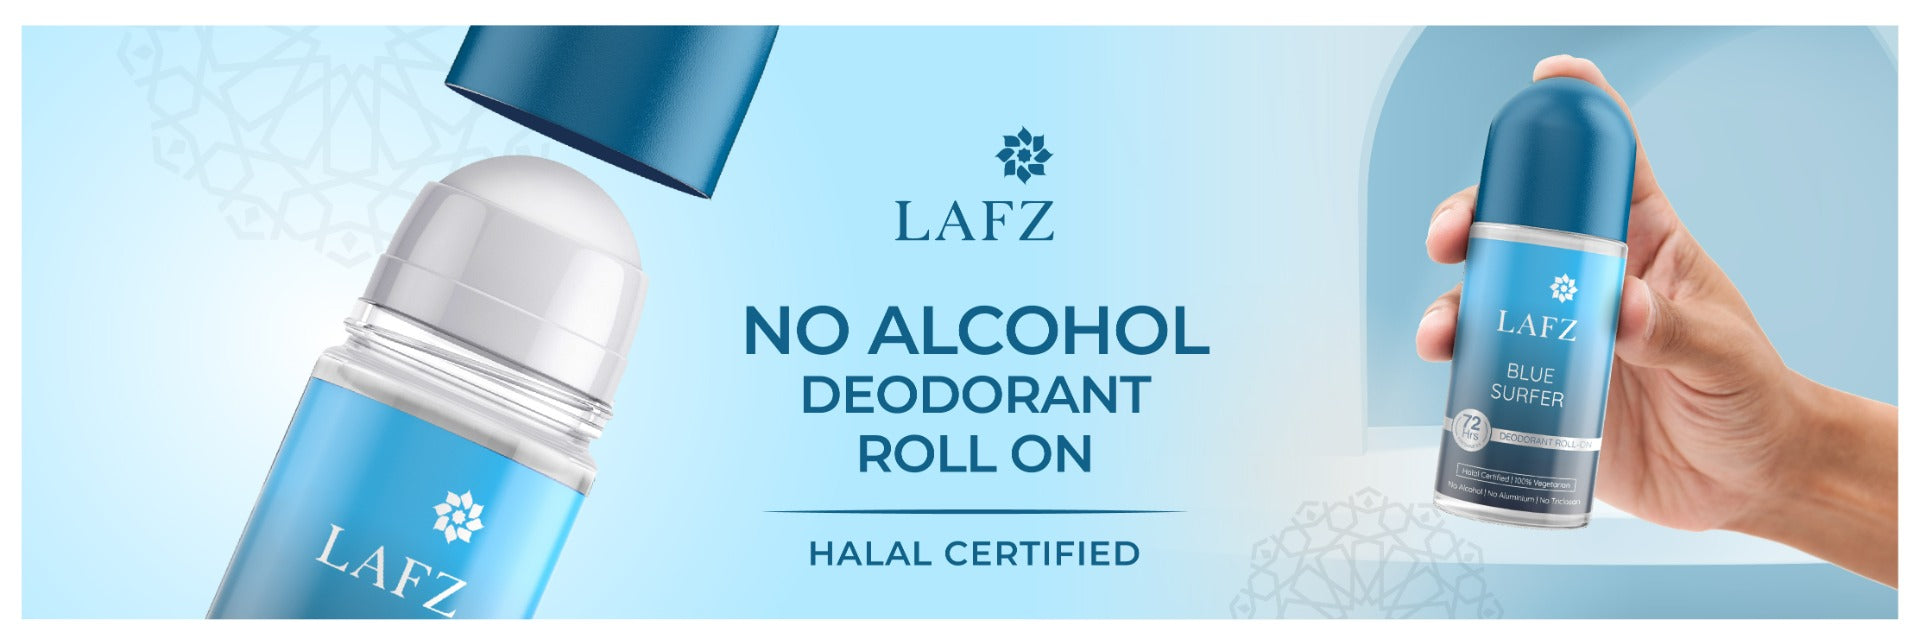 LAFZ No Alcohol Roll On Deodorant Blue Surfer for Men (50ml)